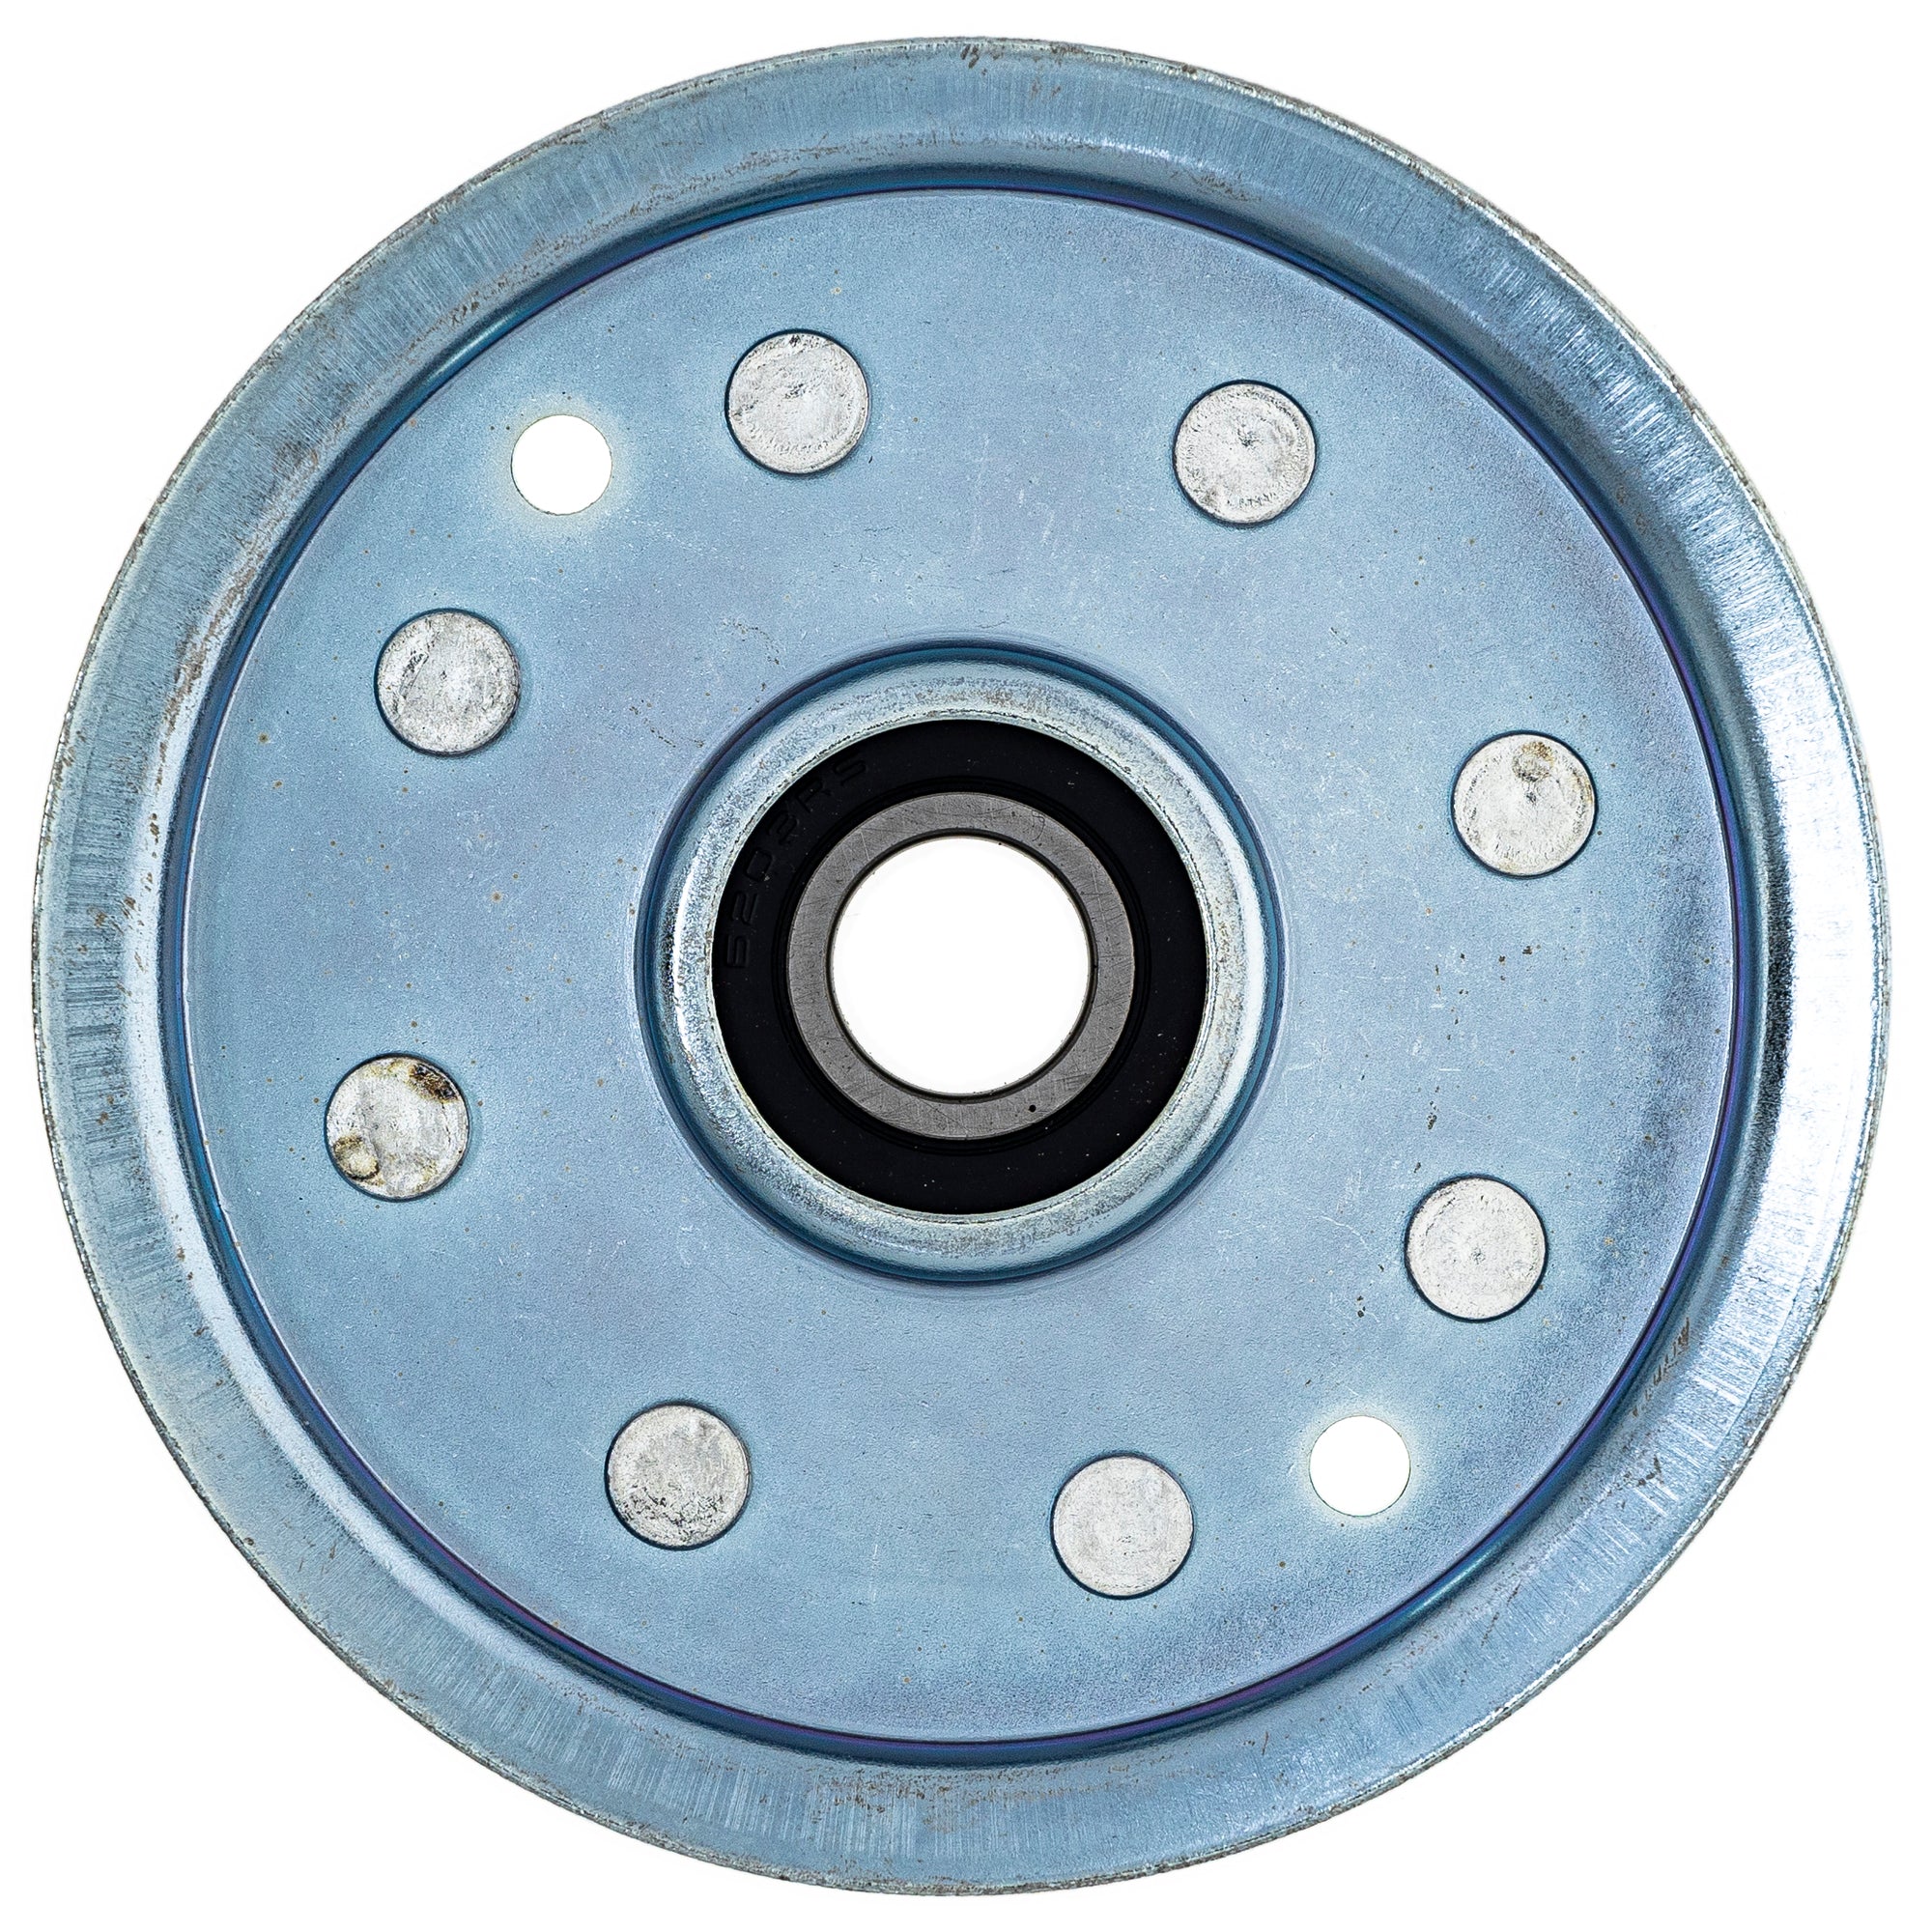 8TEN 810-CID2326L Idler Pulley for zOTHER Toro Exmark SL500 LX500